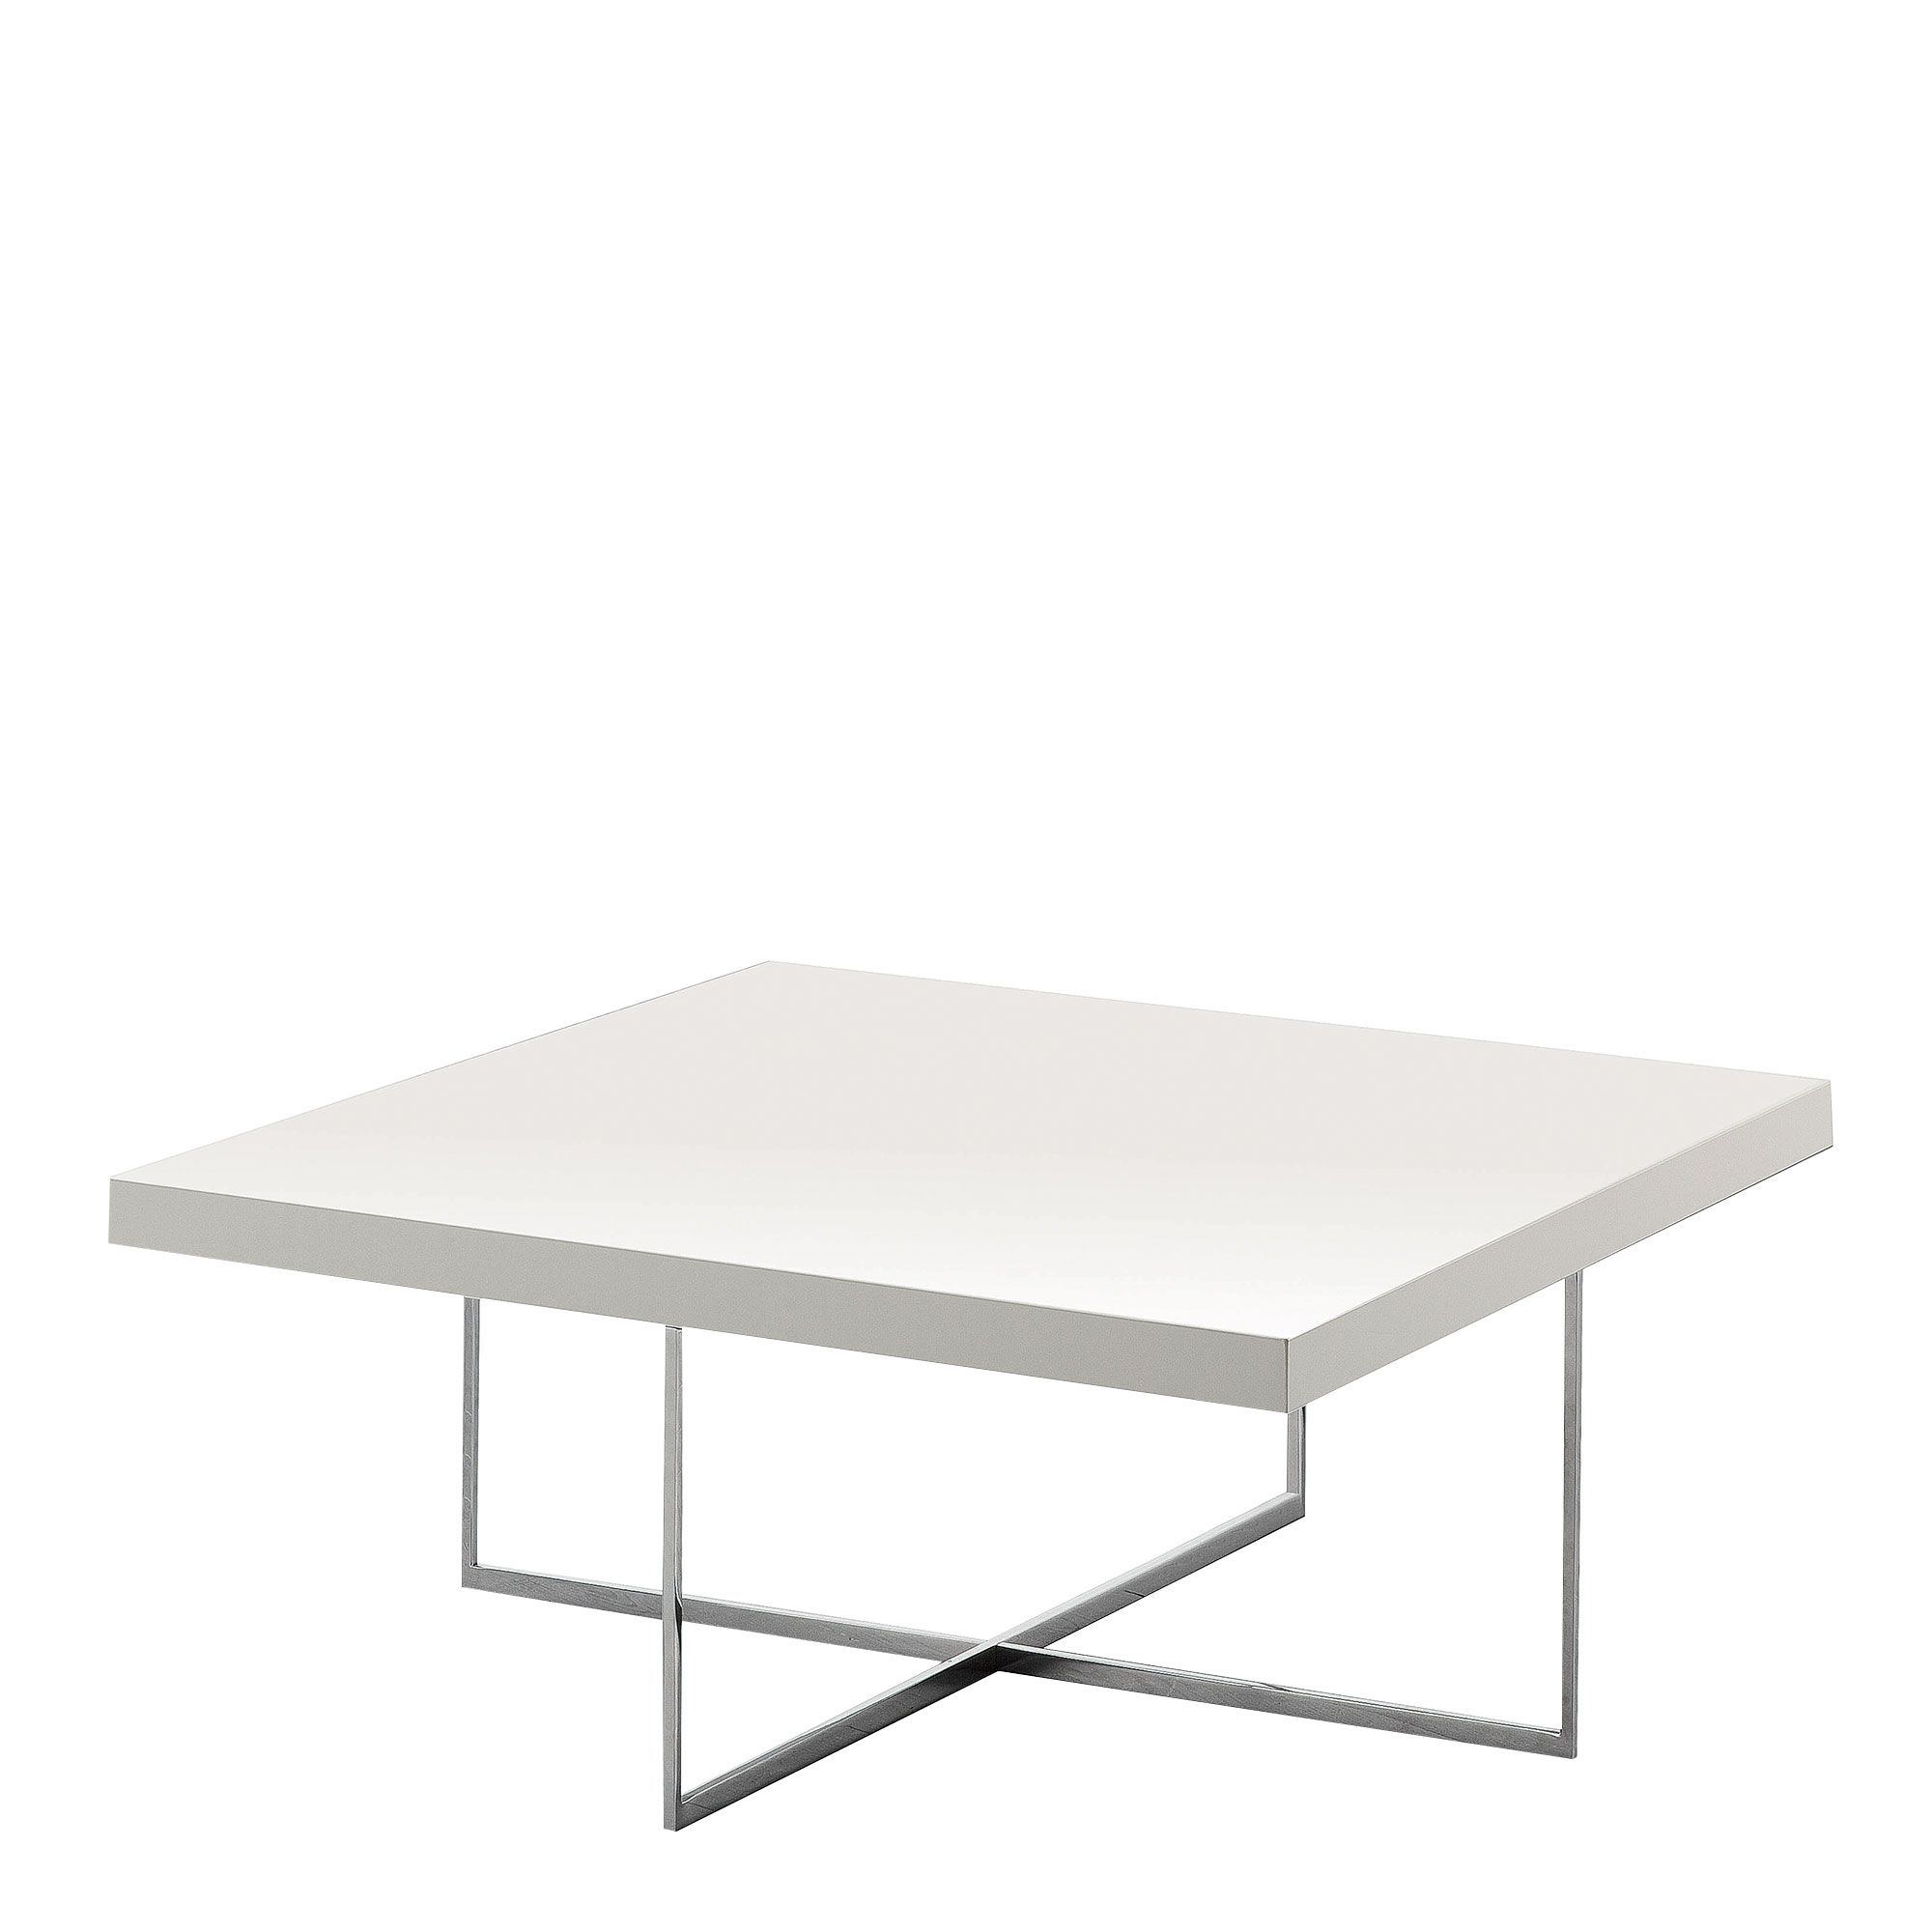 Most Popular Bernini – Square Coffee Table White High Gloss Regarding Square High Gloss Coffee Tables (View 20 of 20)